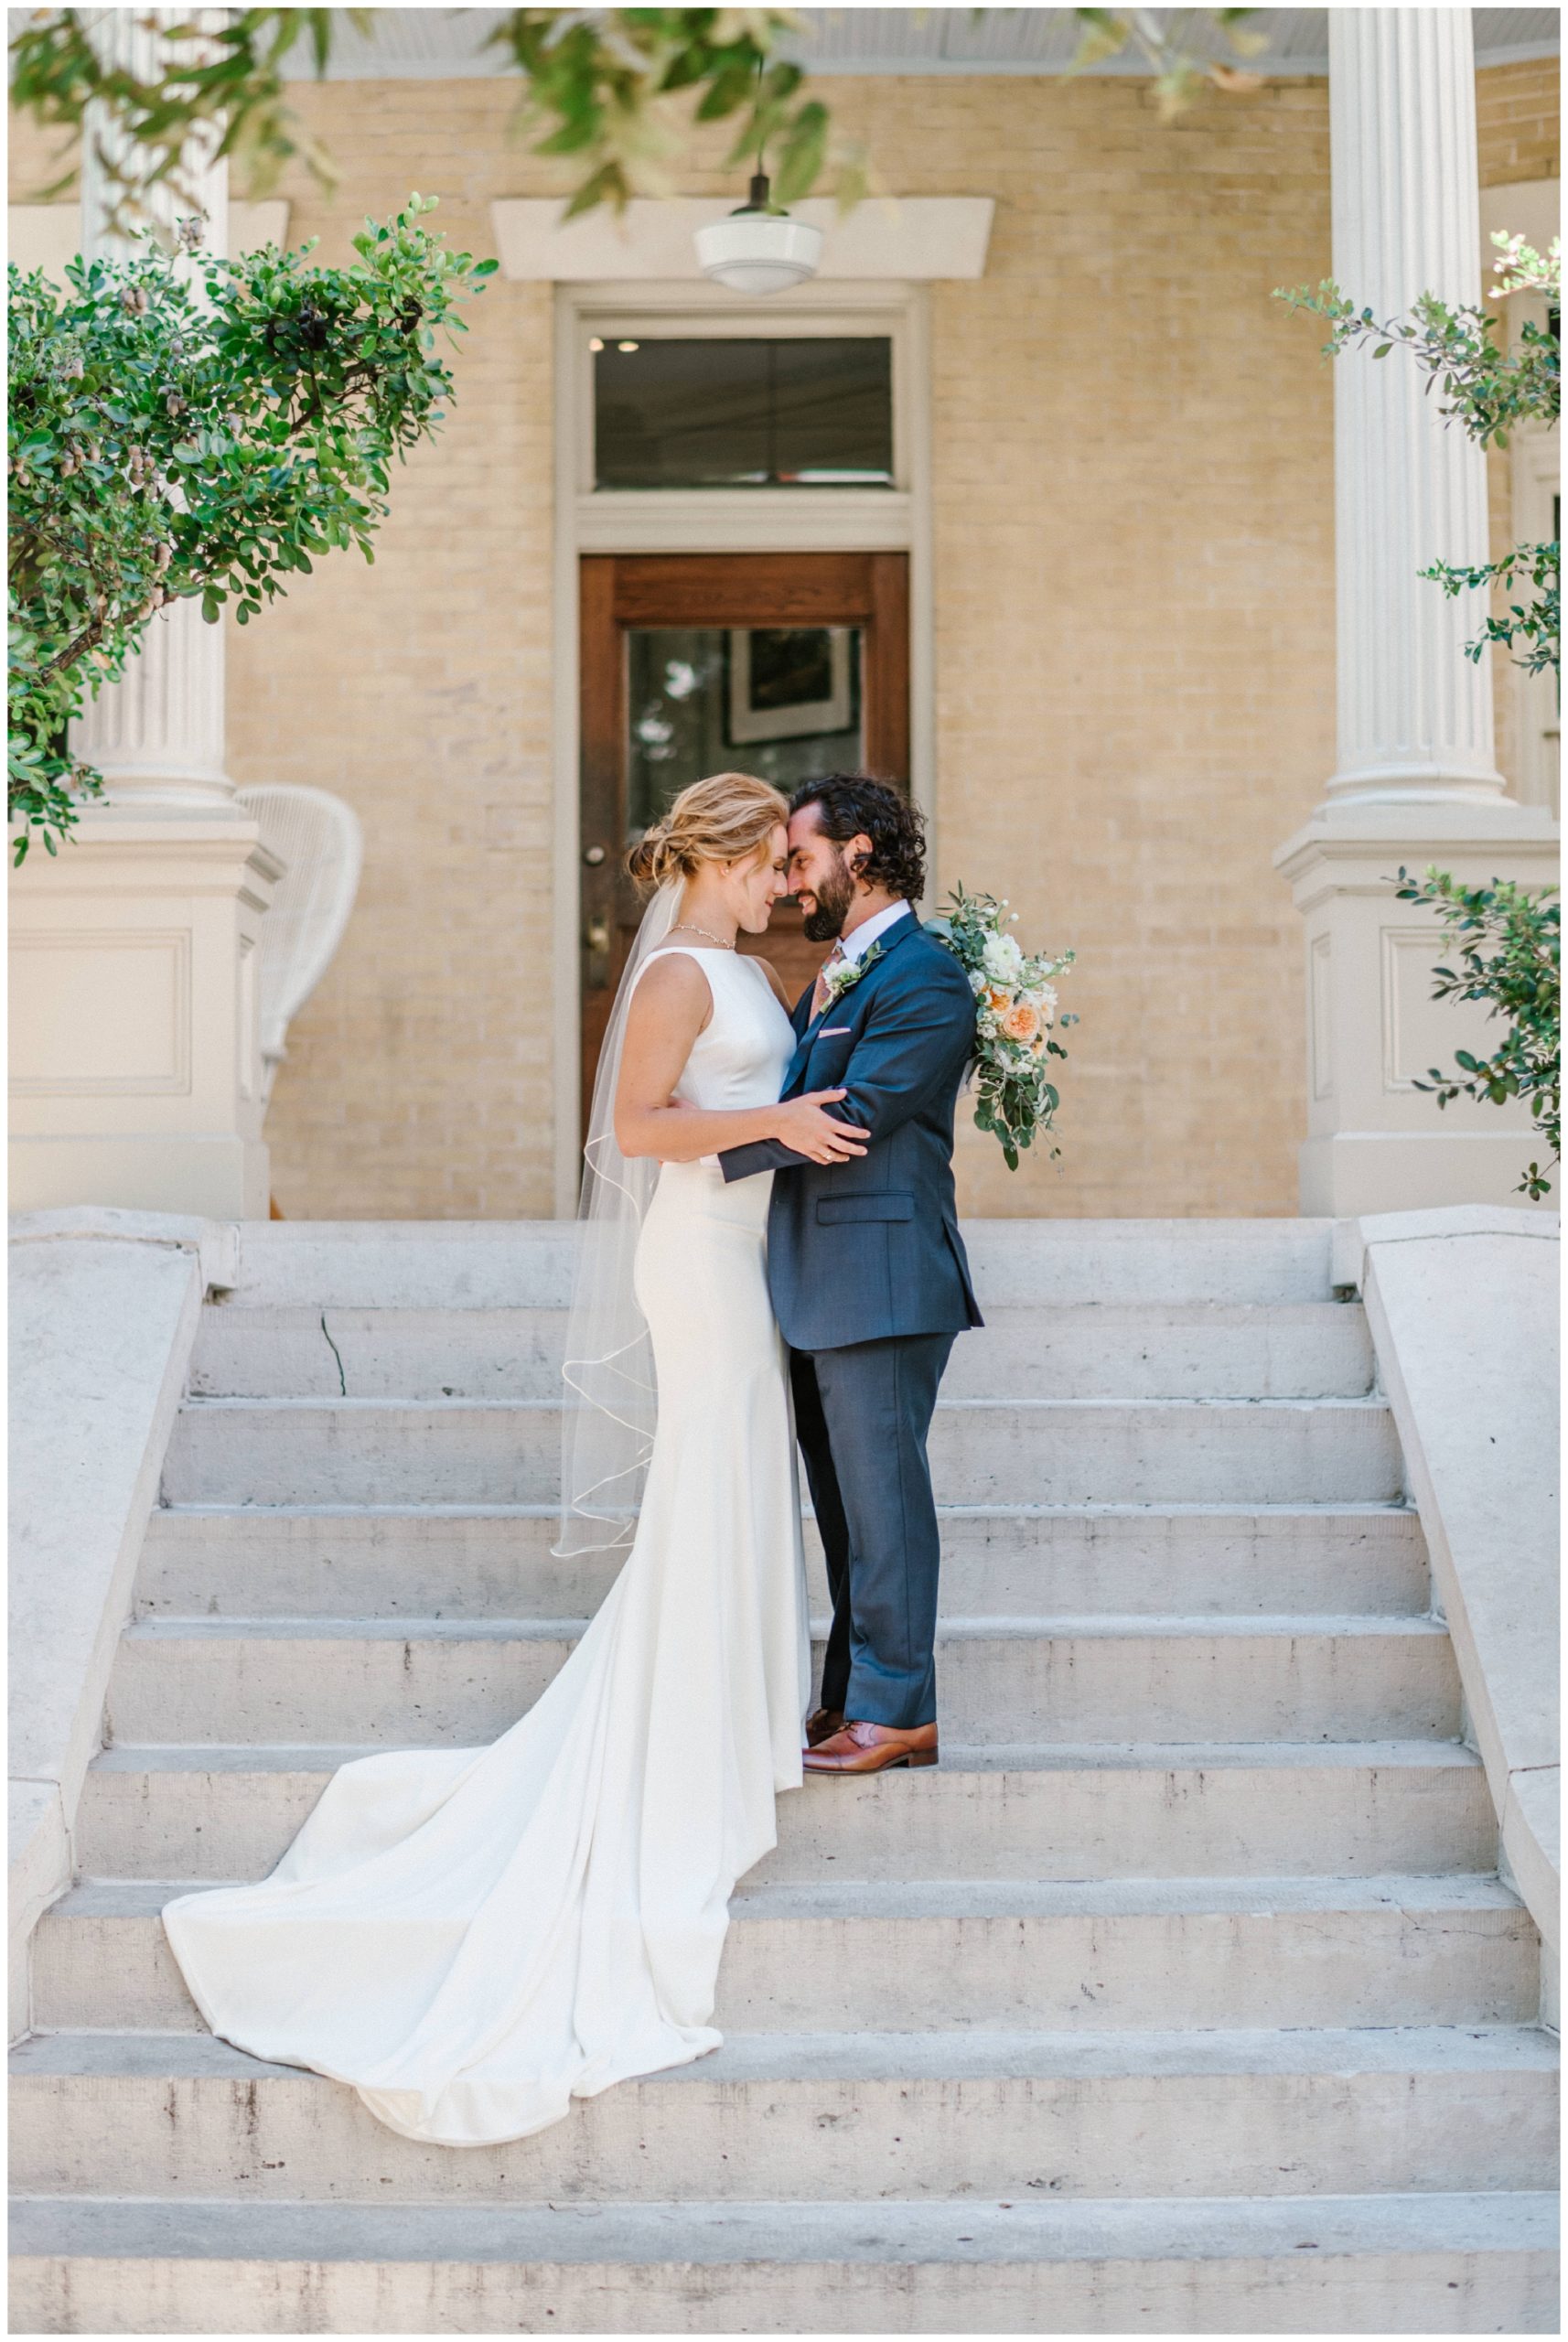 Bride in Devon by The from Unbridaled | Austin Wedding Photography by Joslyn Holtfort